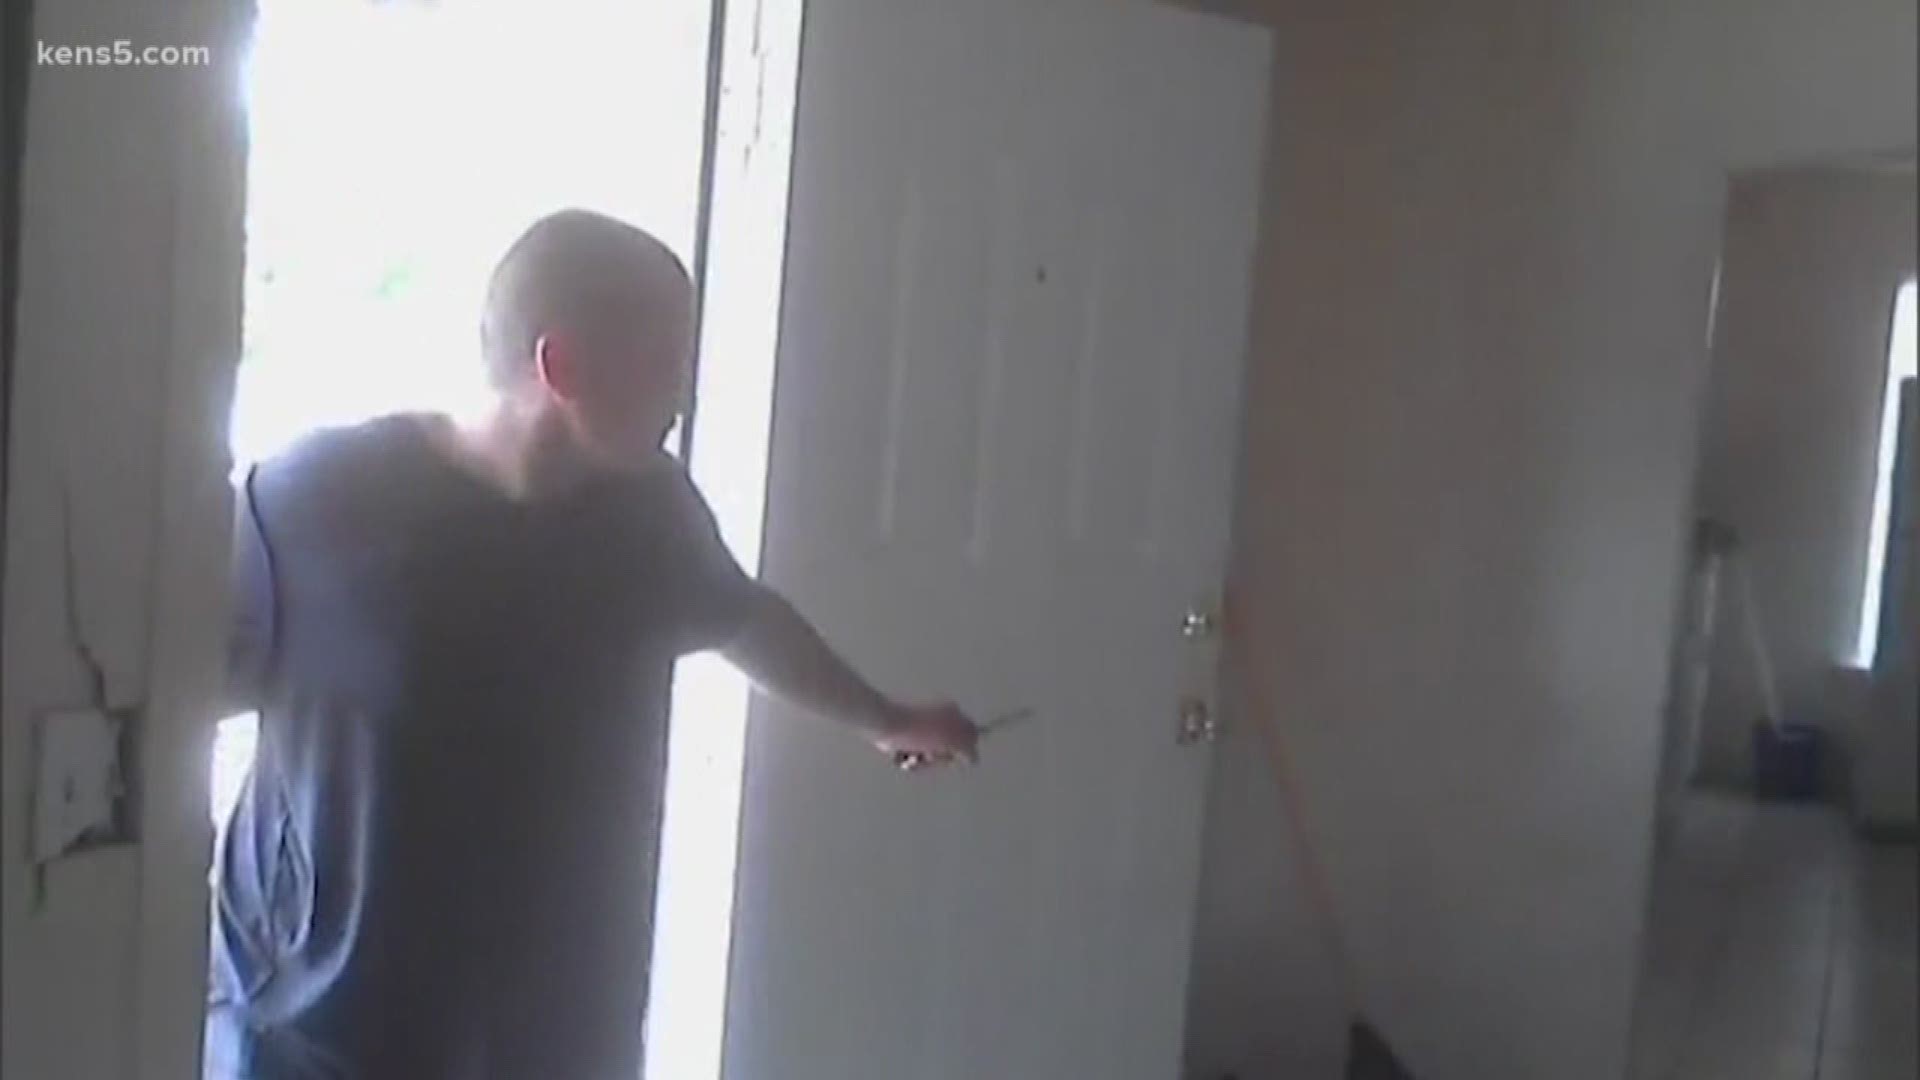 Home security video caught a man armed with a knife breaking into a southeast home in broad daylight.